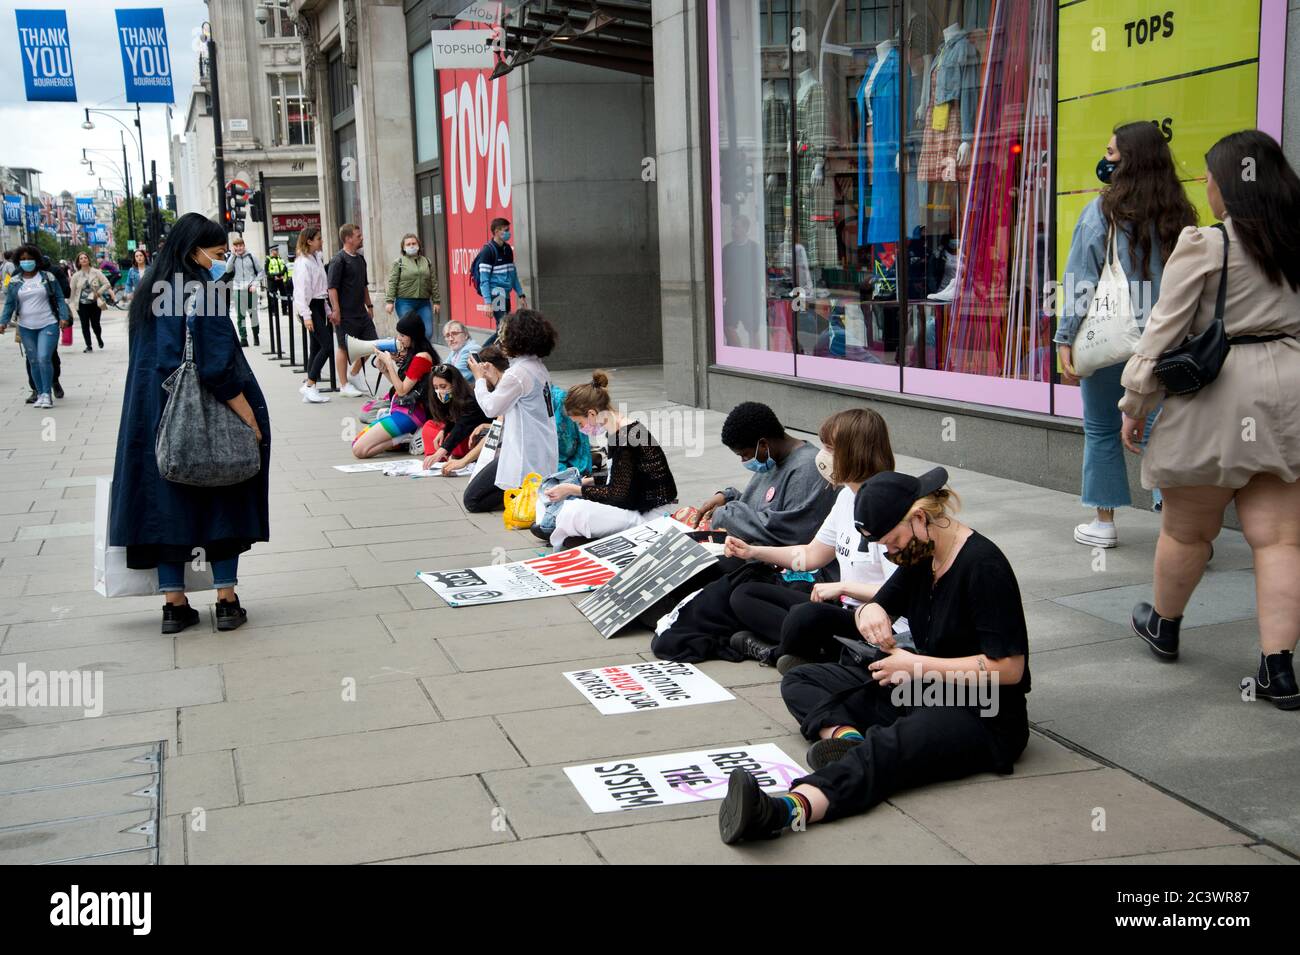 London during the pandemic, June 2020. Oxford Street. Reopening of shops. Protesters from Extinction Rebelion protest outside Top Shop against fast fa Stock Photo